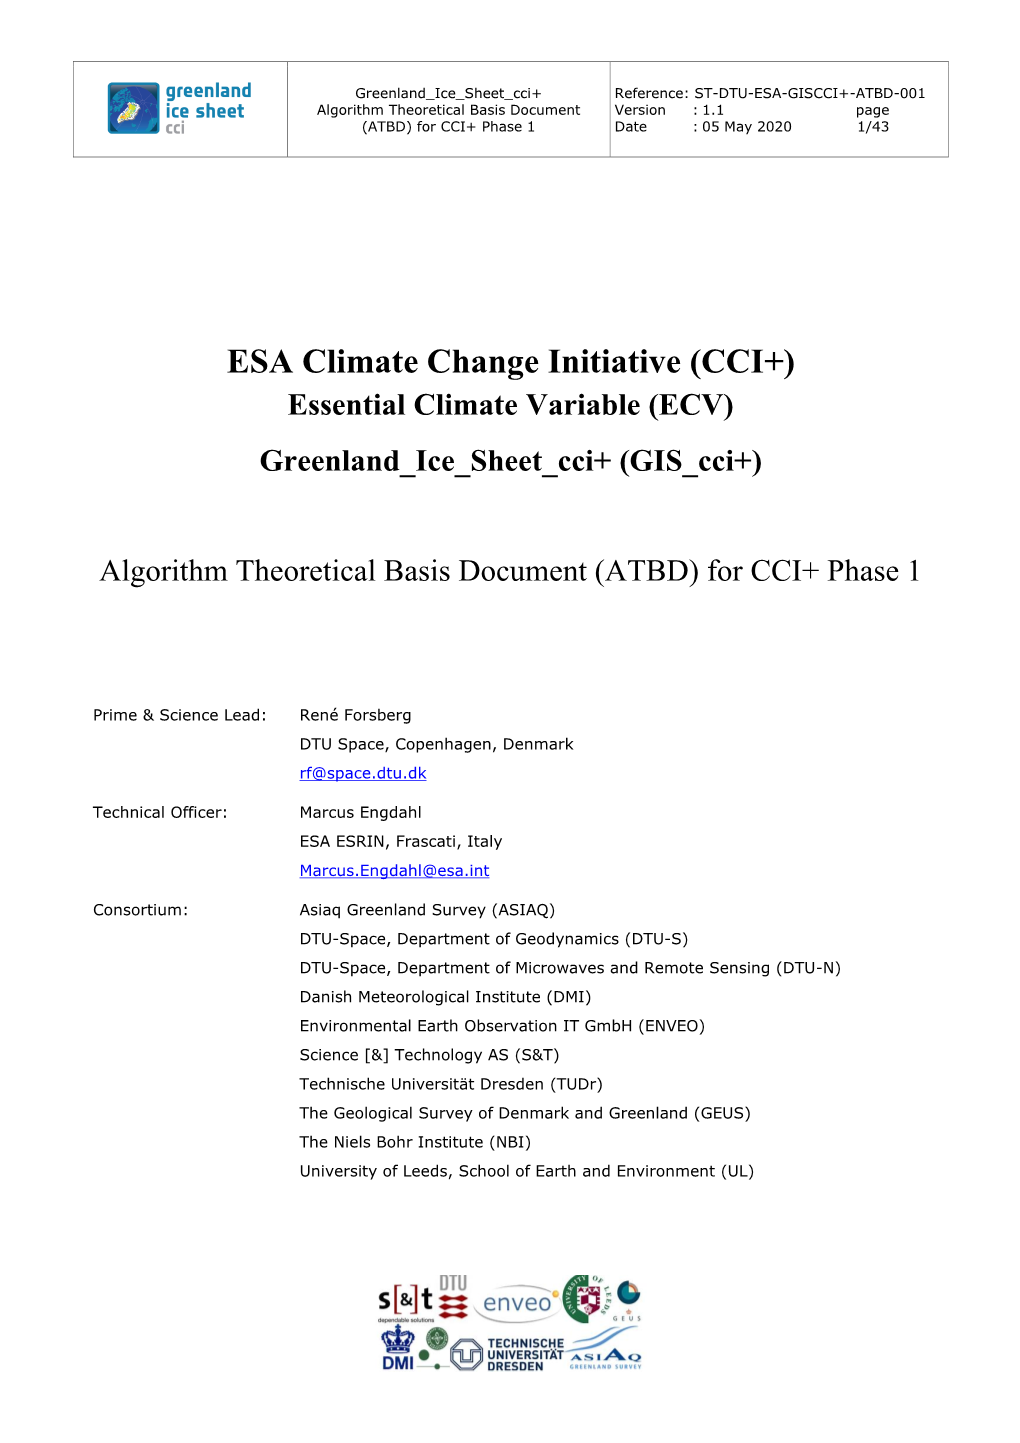 Algorithm Theoretical Basis Document (ATBD) for CCI+ Phase 1